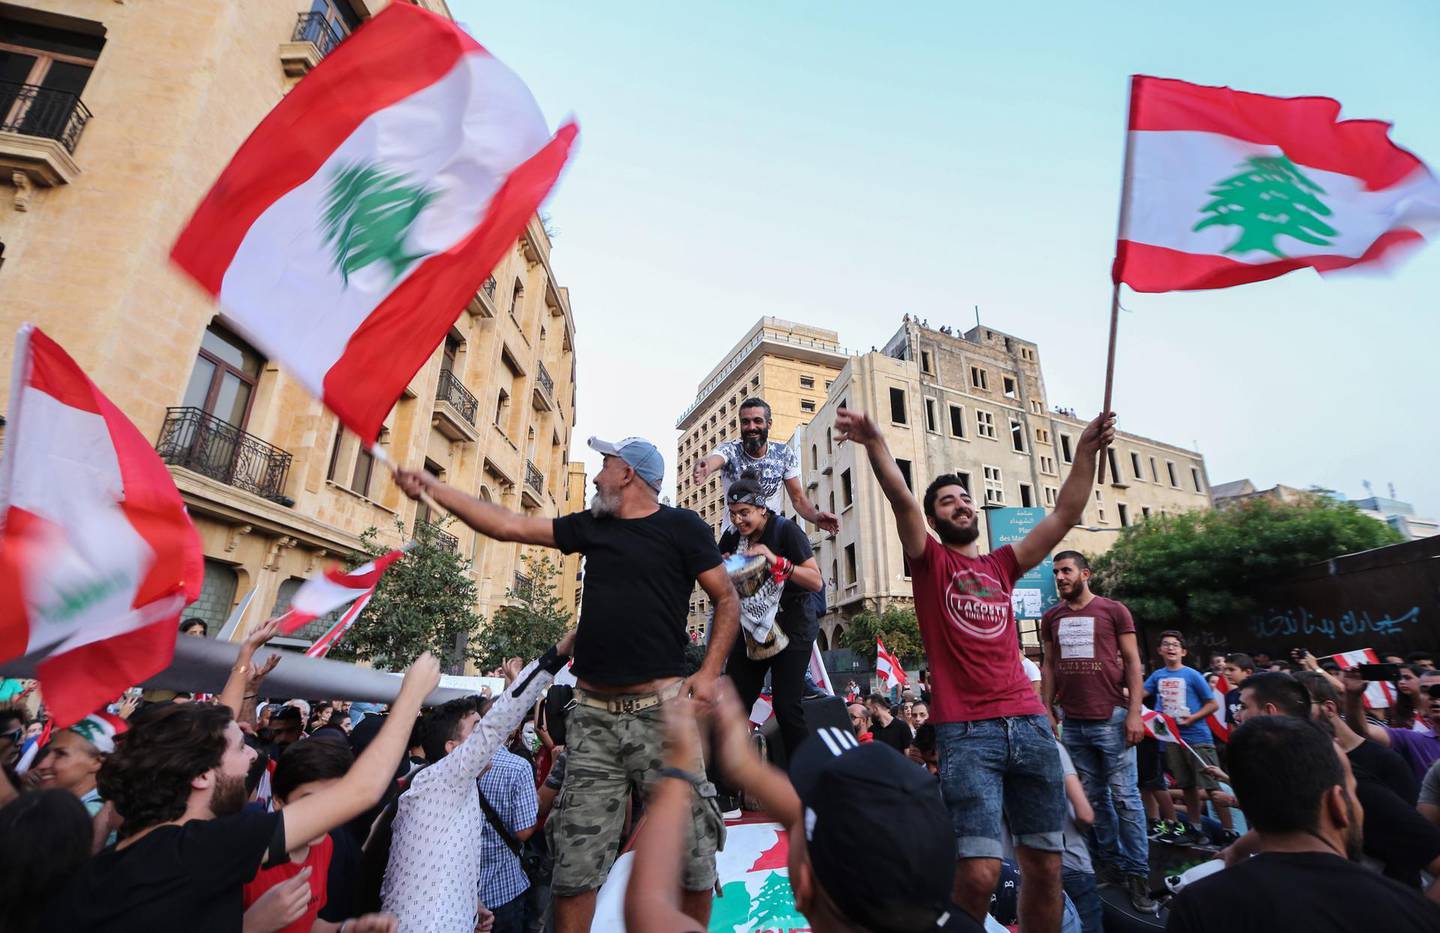 epa07941572 Protesters carry placards, wave Lebanese flags and shout anti-government slogans during a protest in front the Government palace in downtown Beirut, Lebanon, 22 October 2019. Protesters announced they will continue demonstrations and the closure of roads until the resignation of the government and parliament and hold new parliamentary elections one day after Lebanese Prime Minister Saad Hariri announced a series of economic measures adopted by the government and approved the 2020 budget without any new taxes.  EPA/Nabil Mounzer